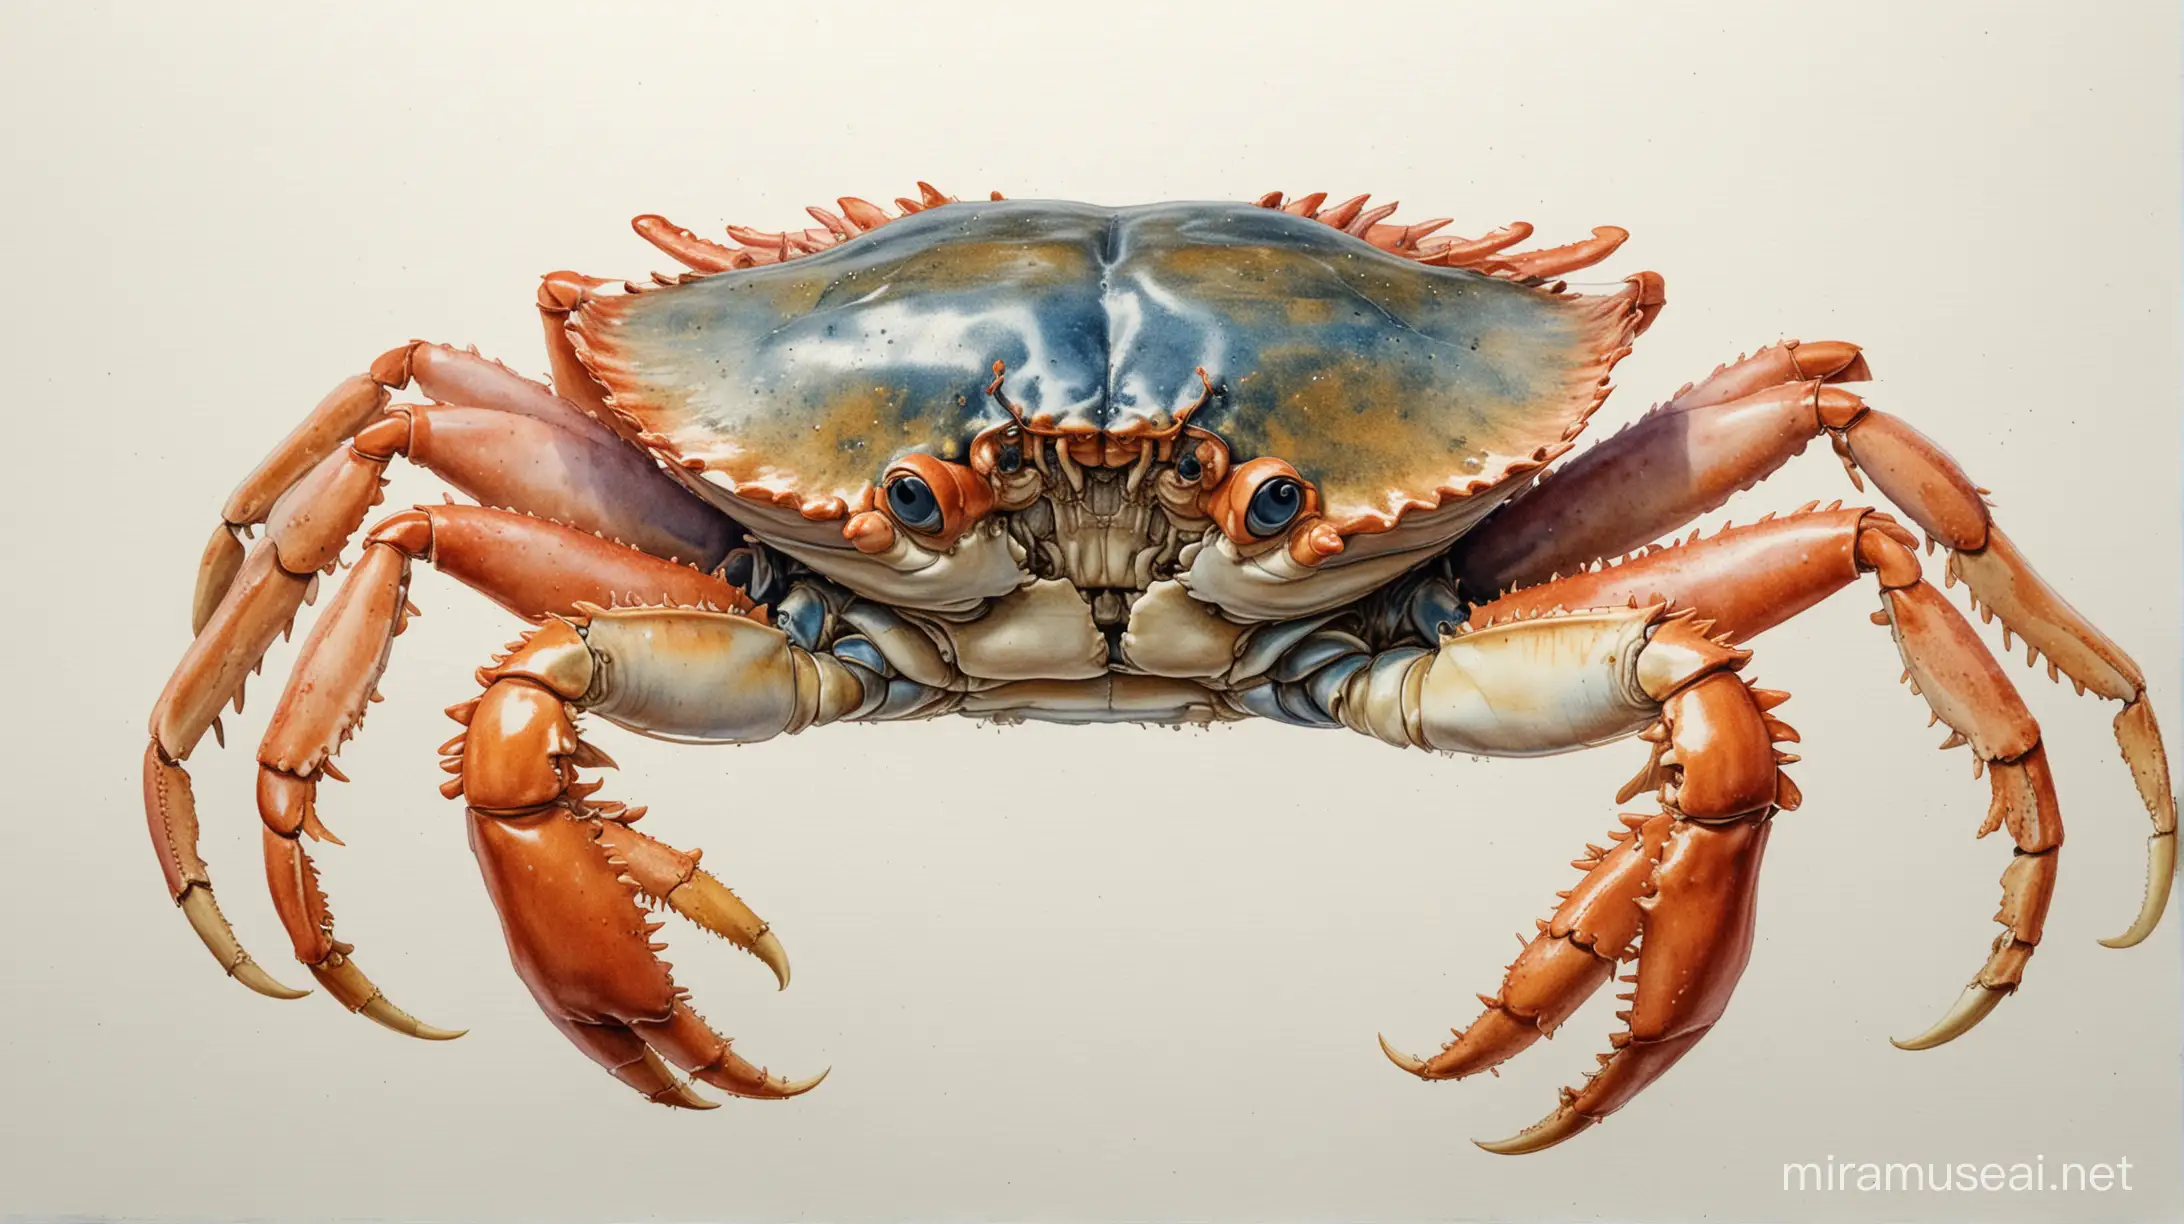 Detailed Technical Drawing of a Crab in Watercolor